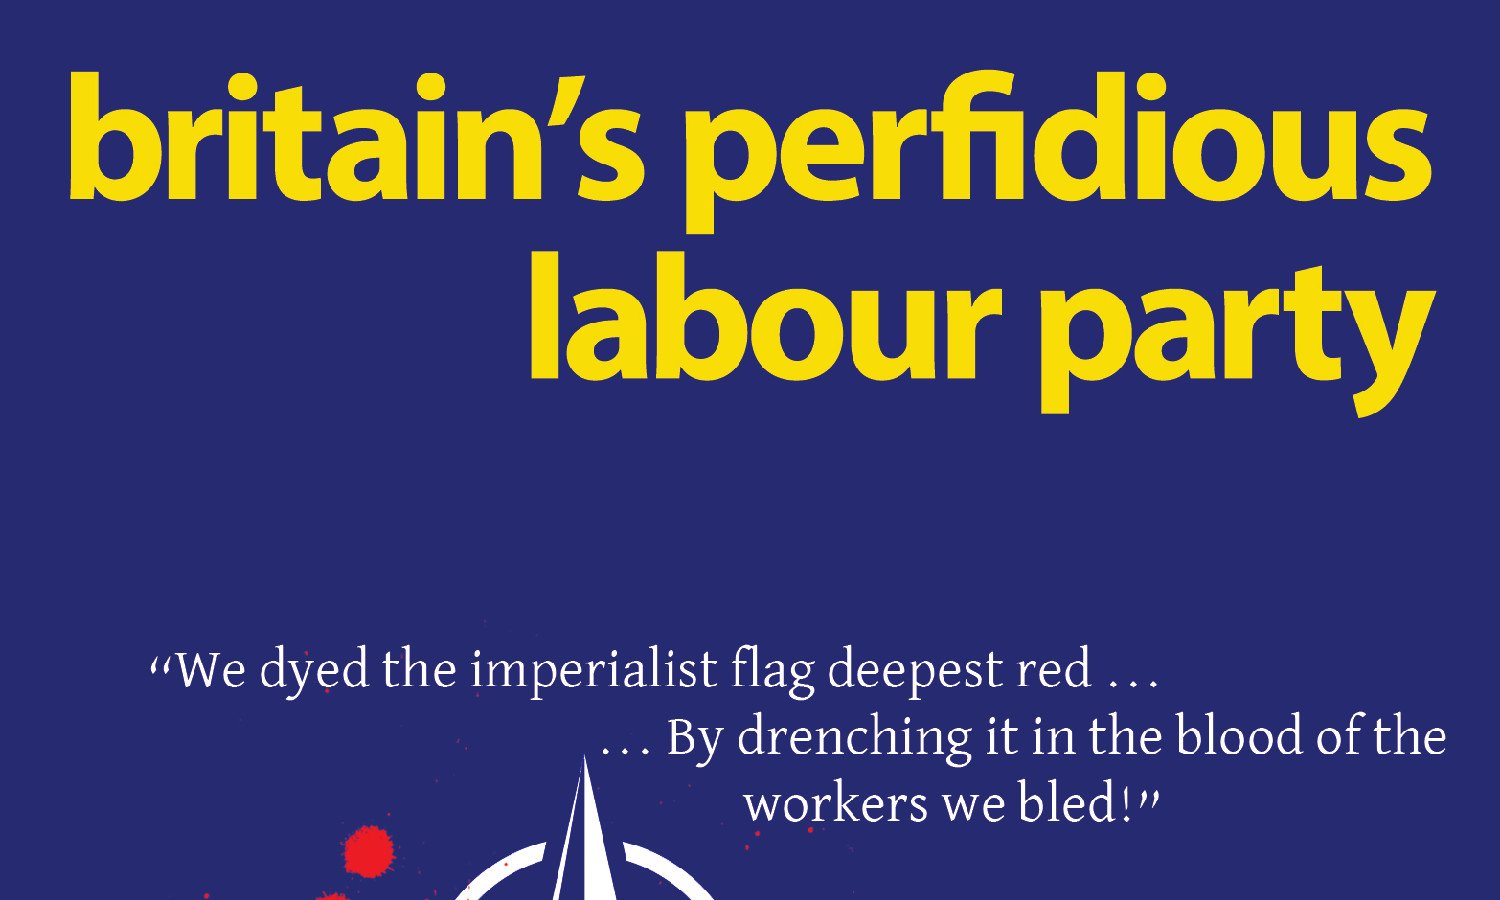 Book: Britain’s Perfidious Labour party by Harpal Brar